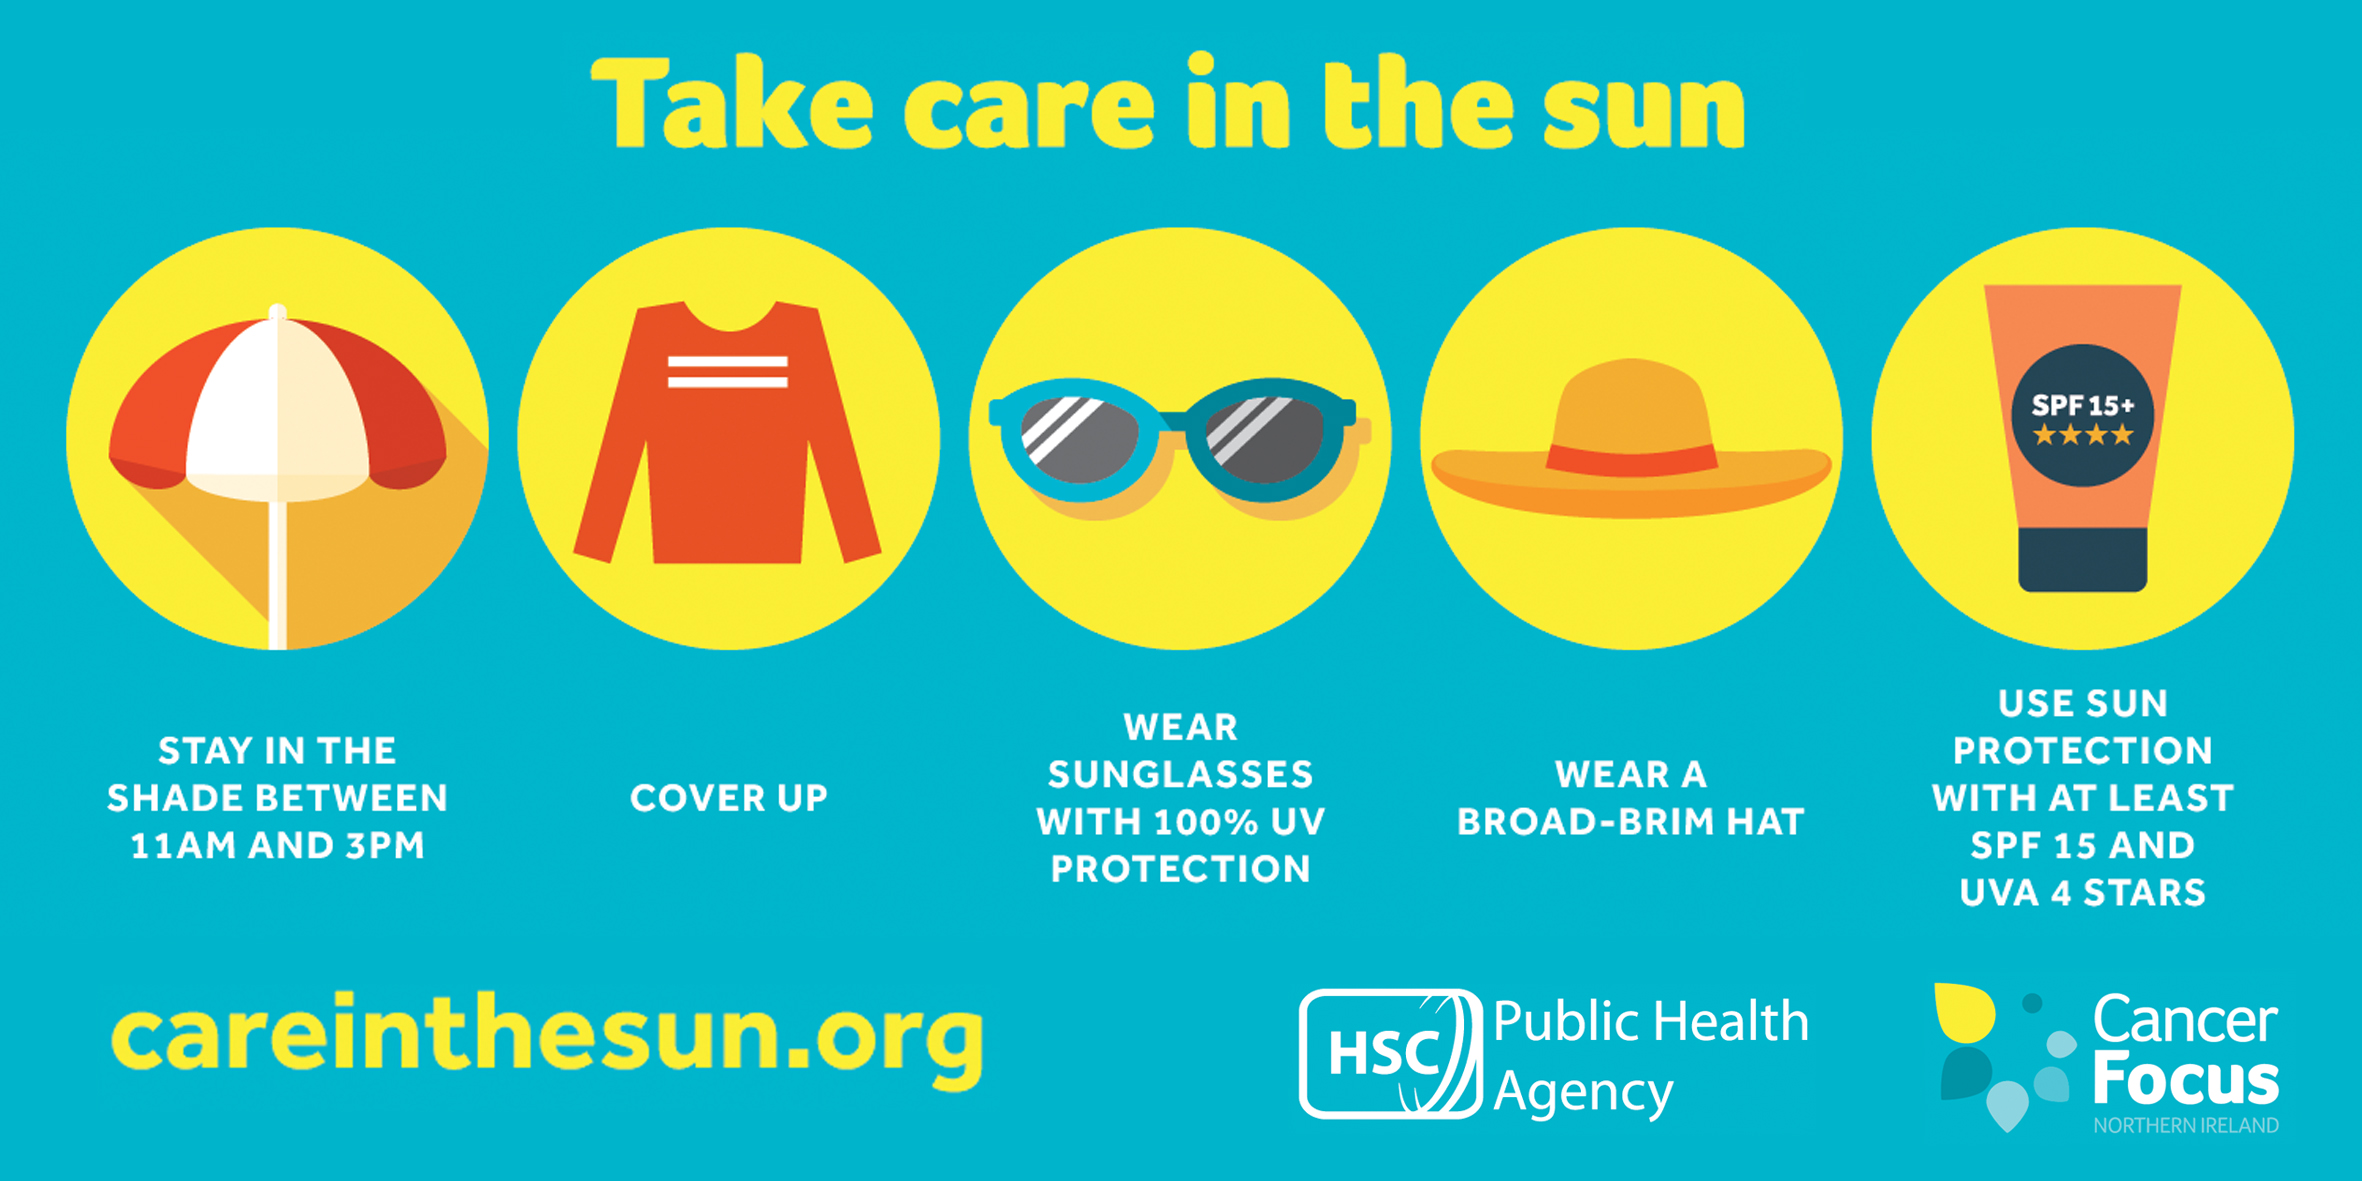 On a blue background the graphic says “care in the sun” in yellow writing. From left to right, the is a graphic of an umbrella and text that says, “stay in the shade between 1am and 3pm”; a graphic of a red long-sleeved top and text that says, “cover up”; a graphic of blue sunglasses and text that says, “wear sunglasses with 100& UV protection”; a graphic of an orange and yellow hat and text that says, “wear a broad-brim hat”; and a graphic of suncream and text that says, “use sun protection with at least S